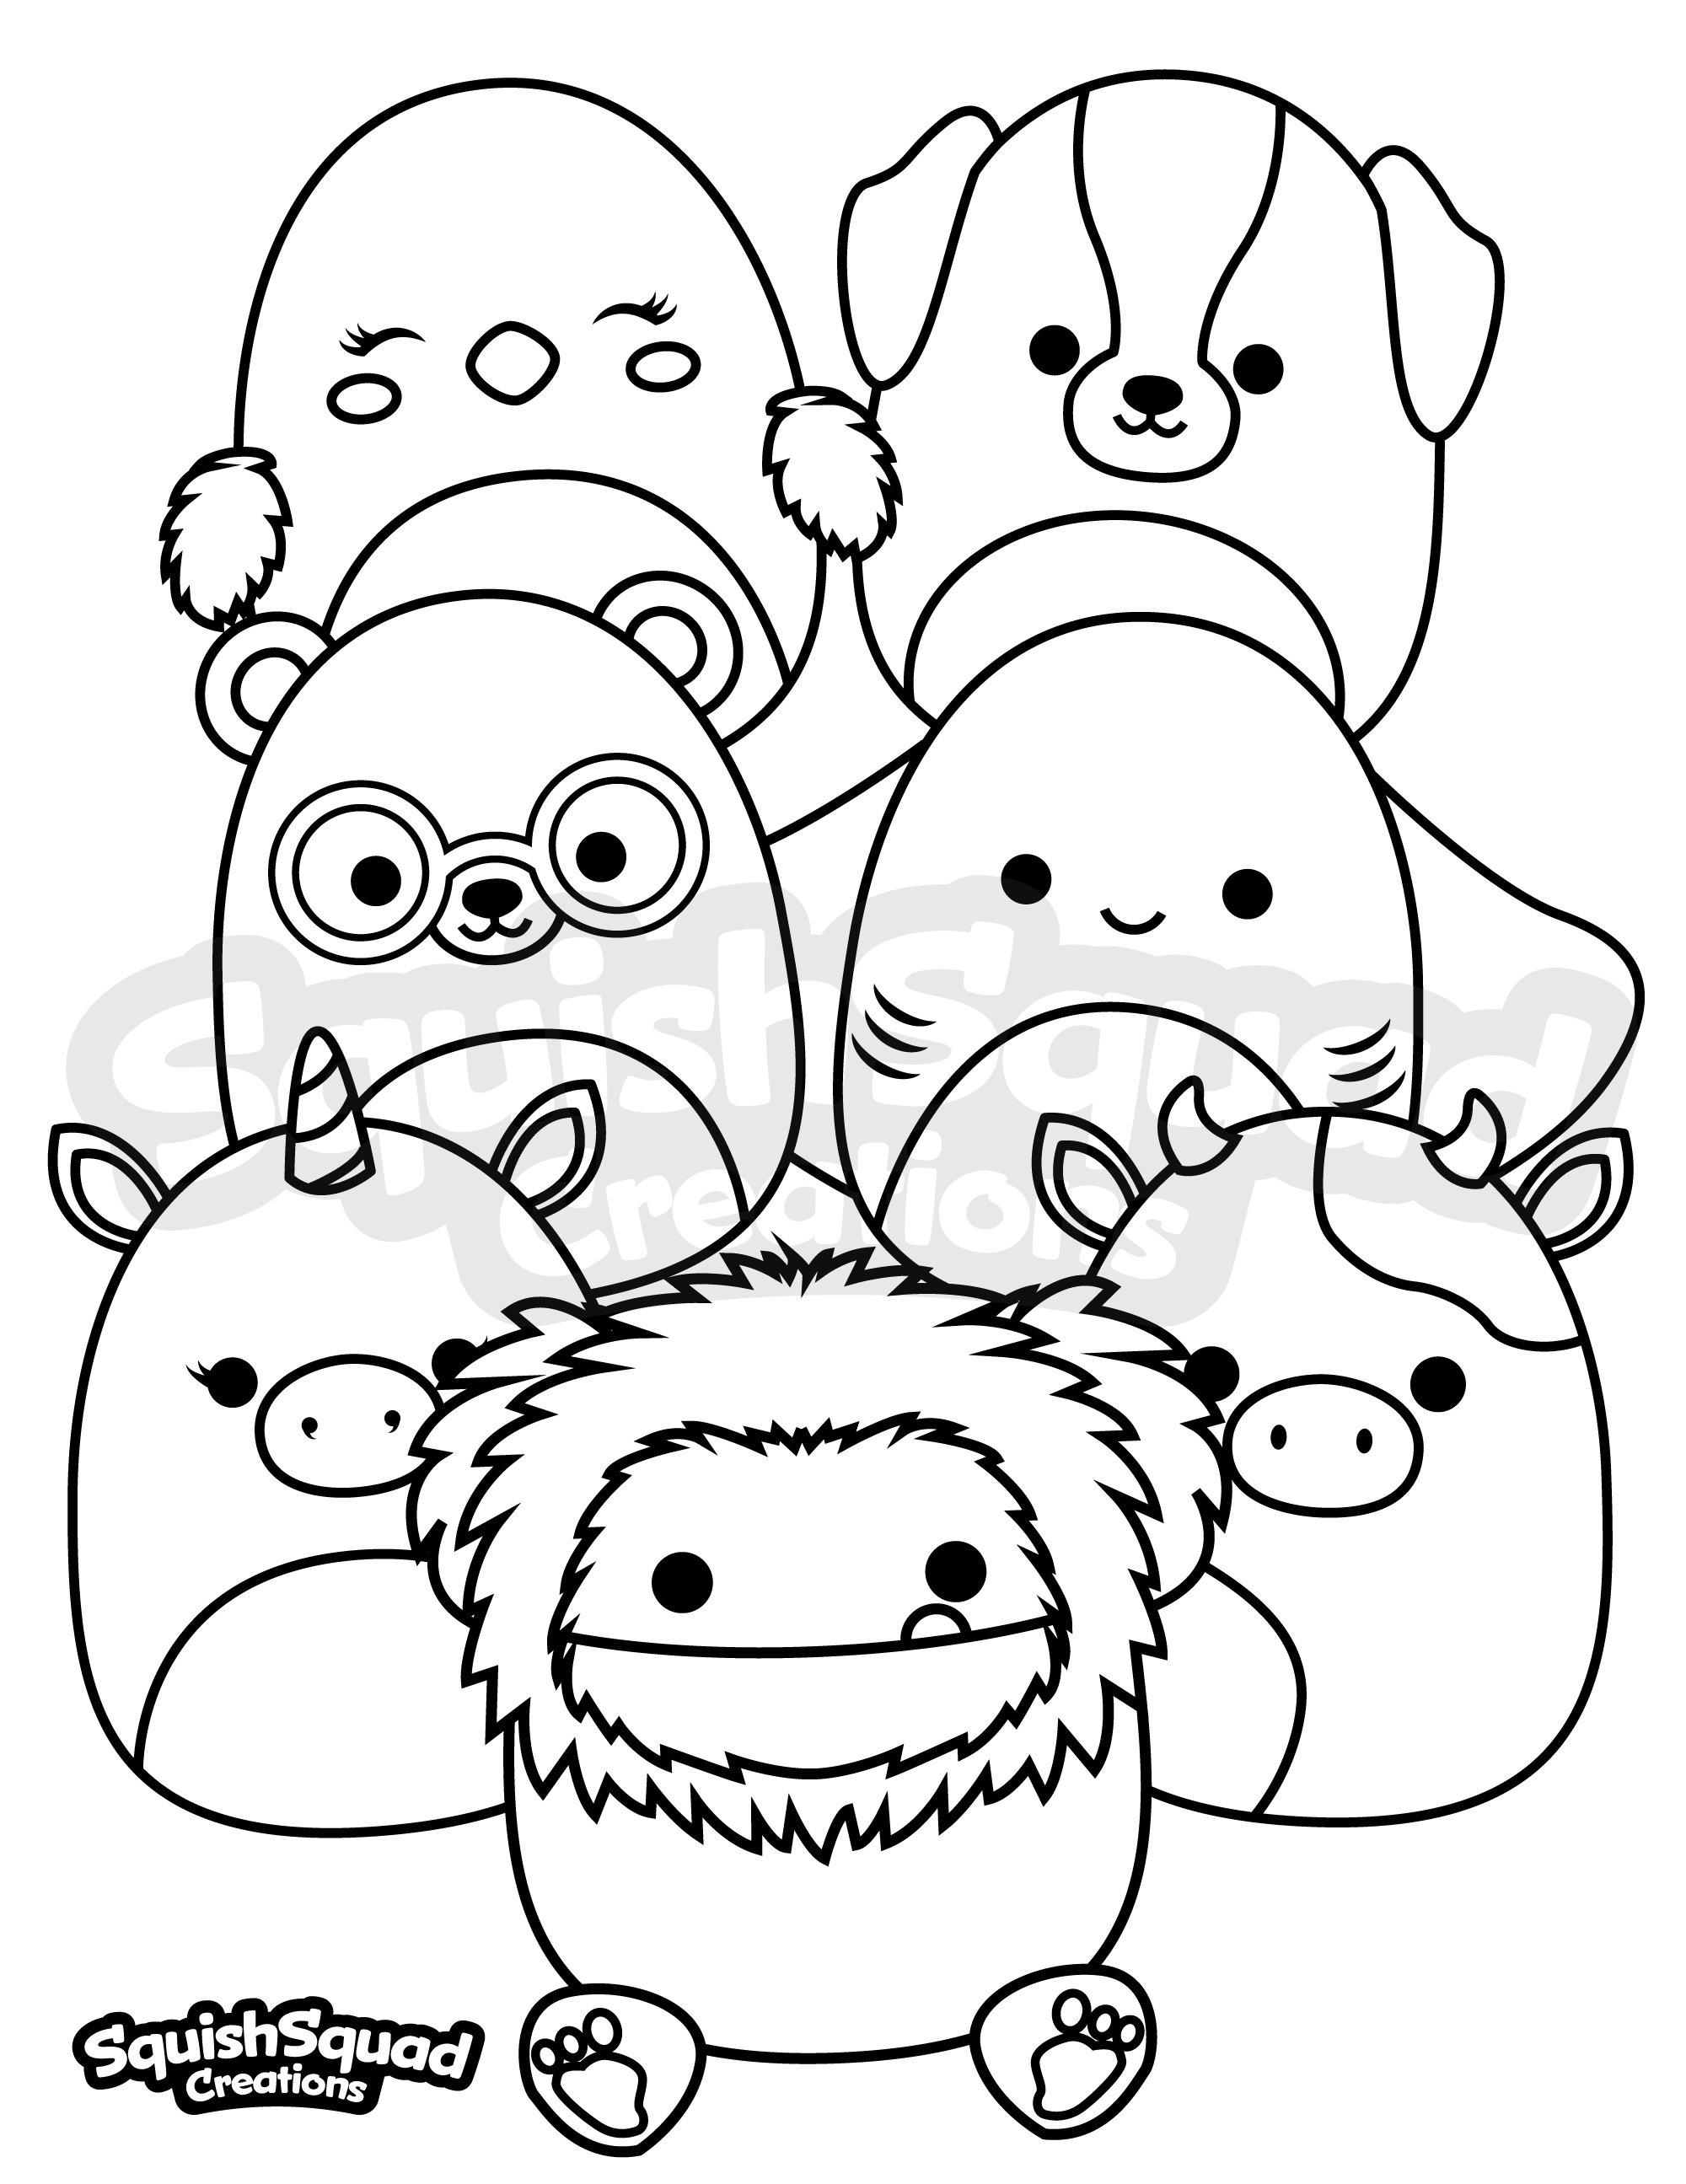 Squishmallow Coloring Page Printable Squishmallow Coloring Etsy Norway